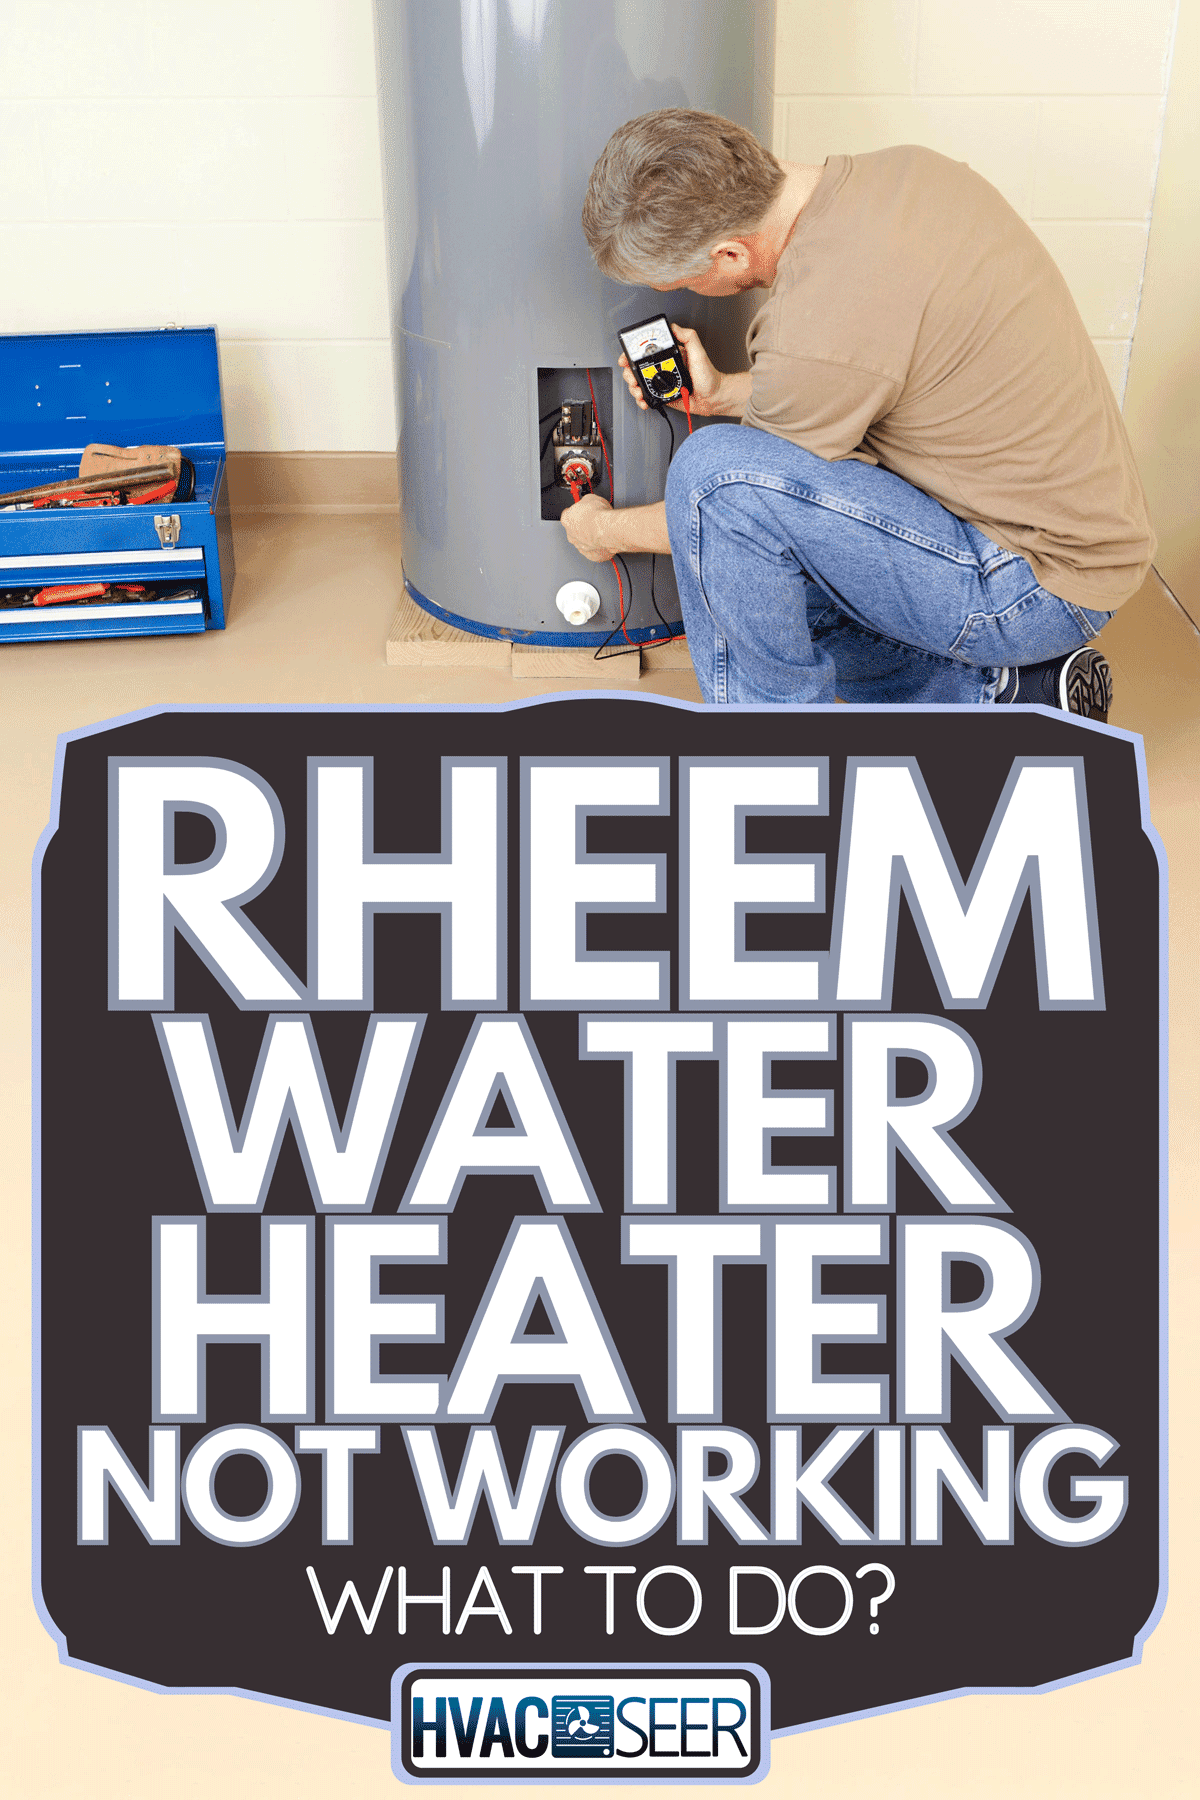 A plumber working in a water heater, Rheem Water Heater Not Working - What To Do?